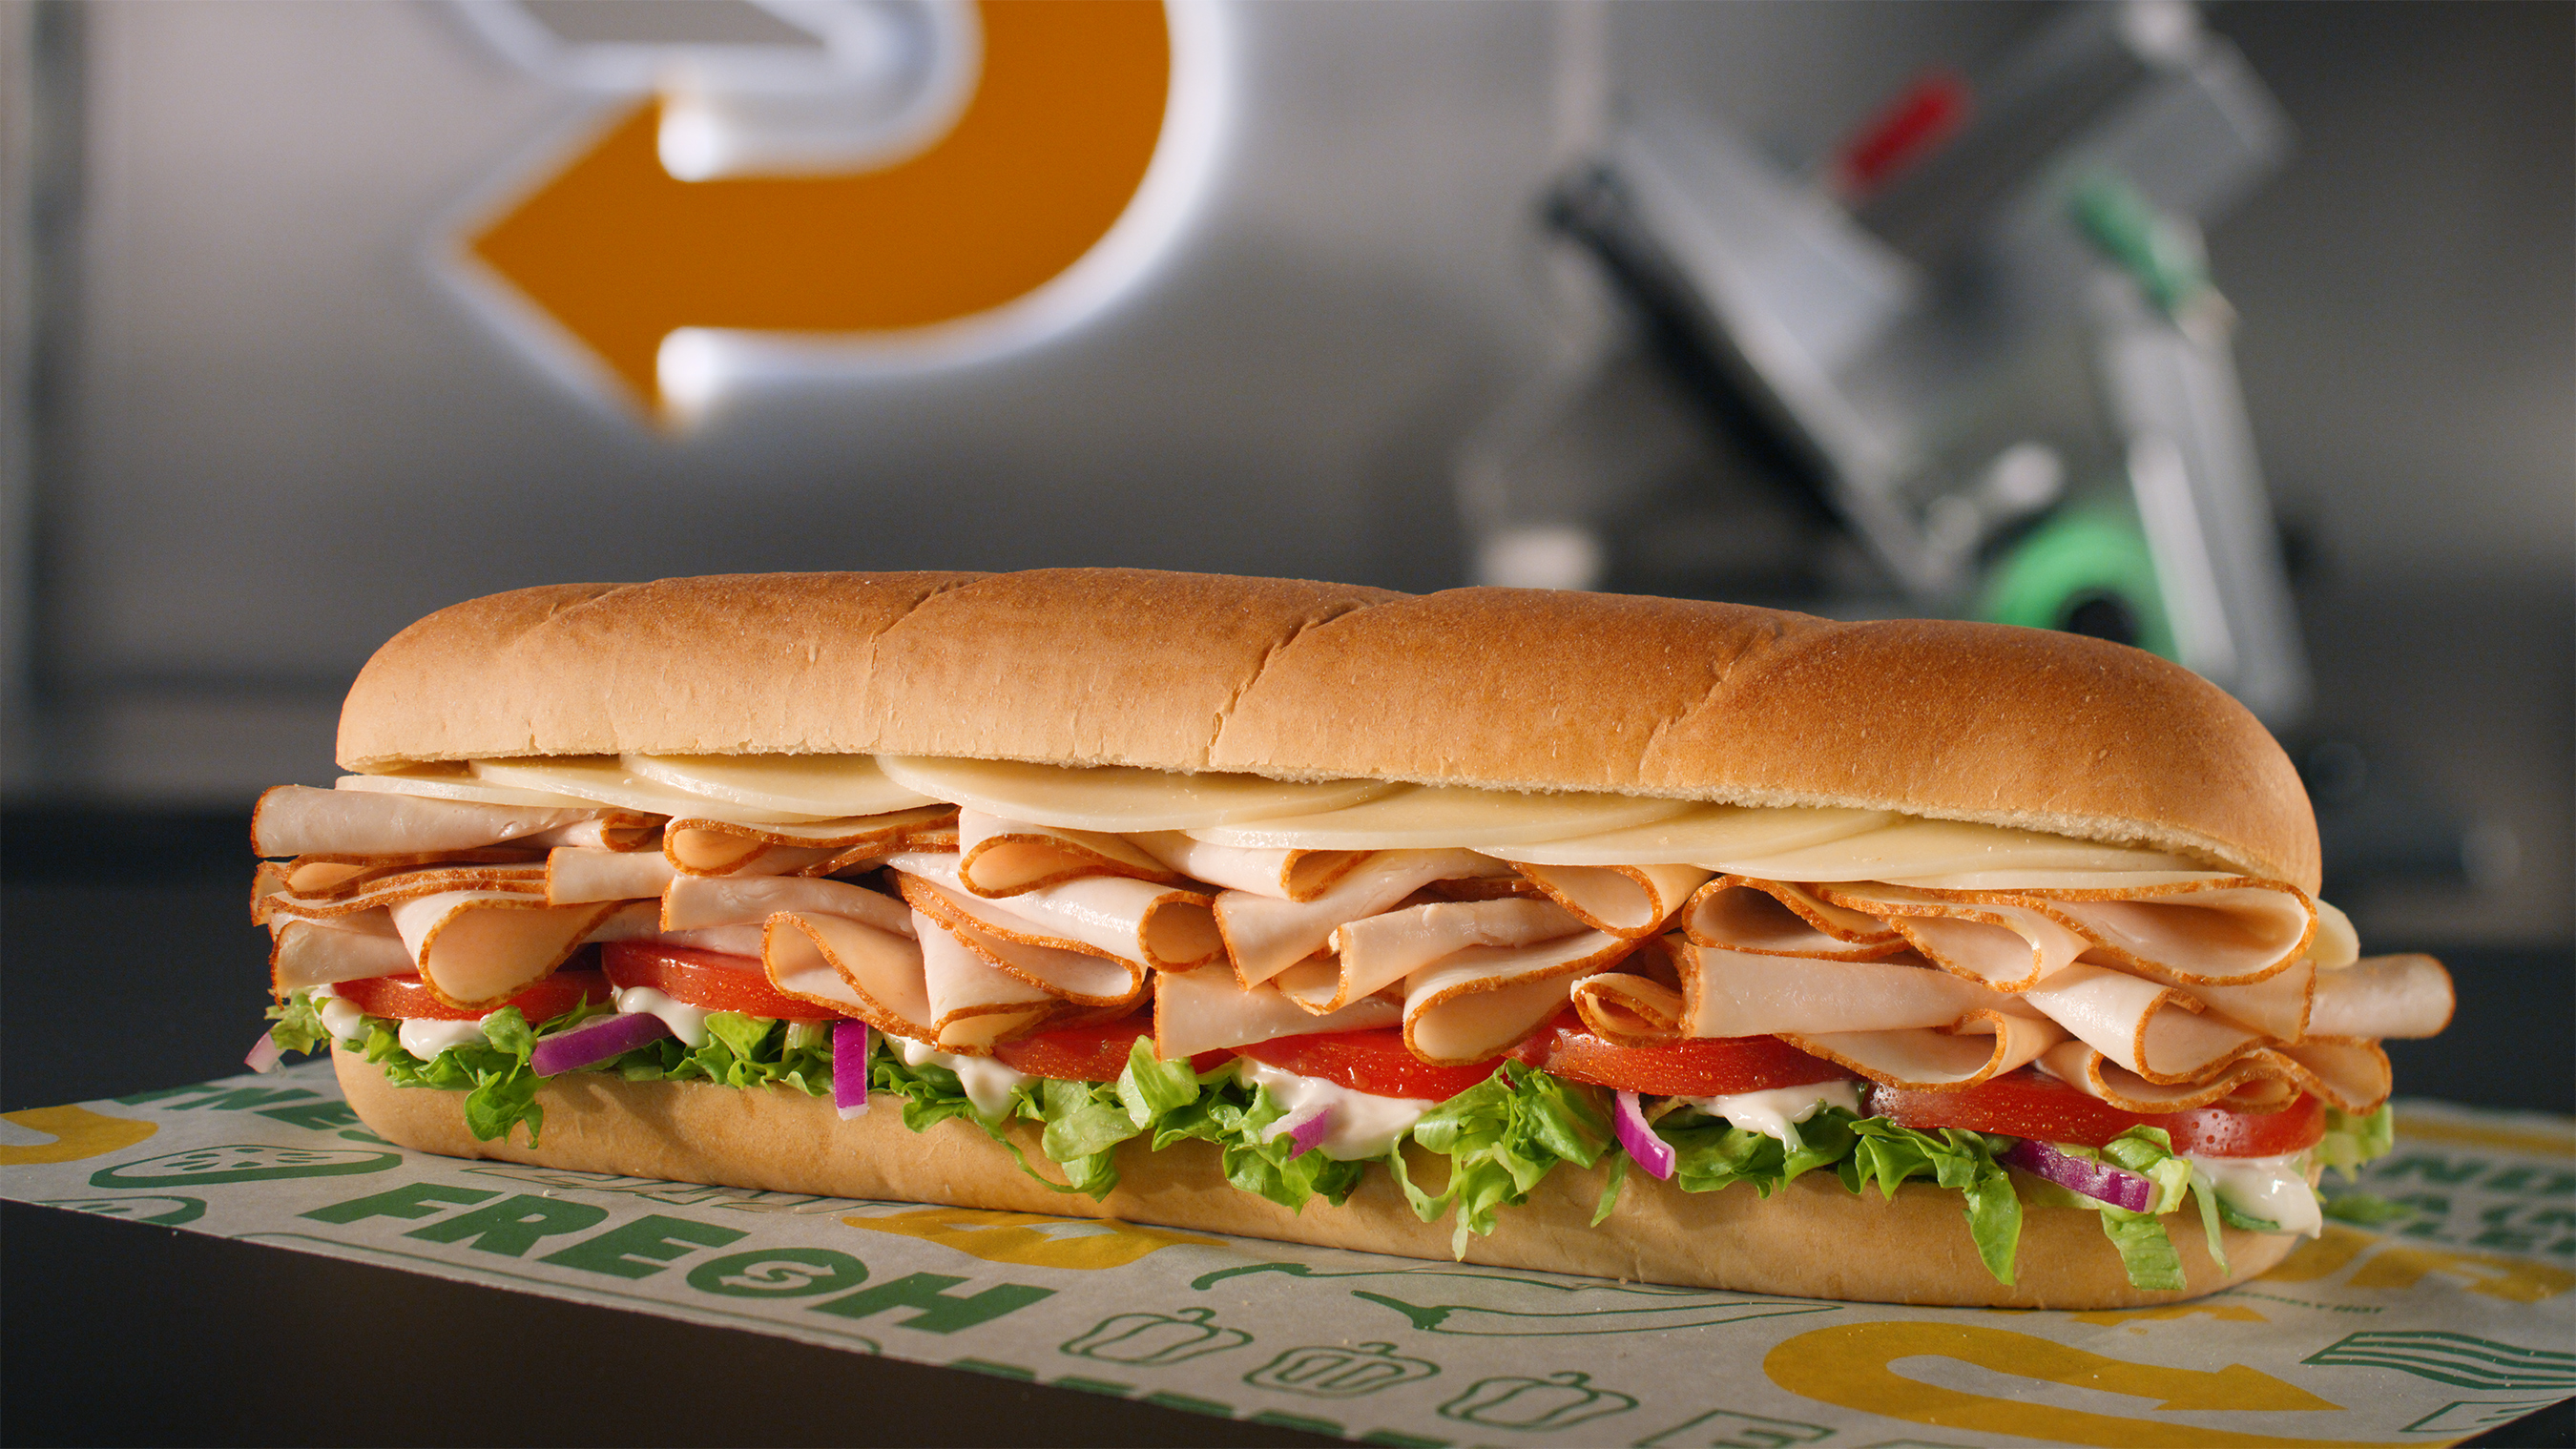 The Titan Turkey (#15) features 33% more meat than traditional subs, with freshly sliced turkey and double provolone cheese on Artisan Italian bread, topped with lettuce, tomatoes, and red onion, and finished with mayonnaise.